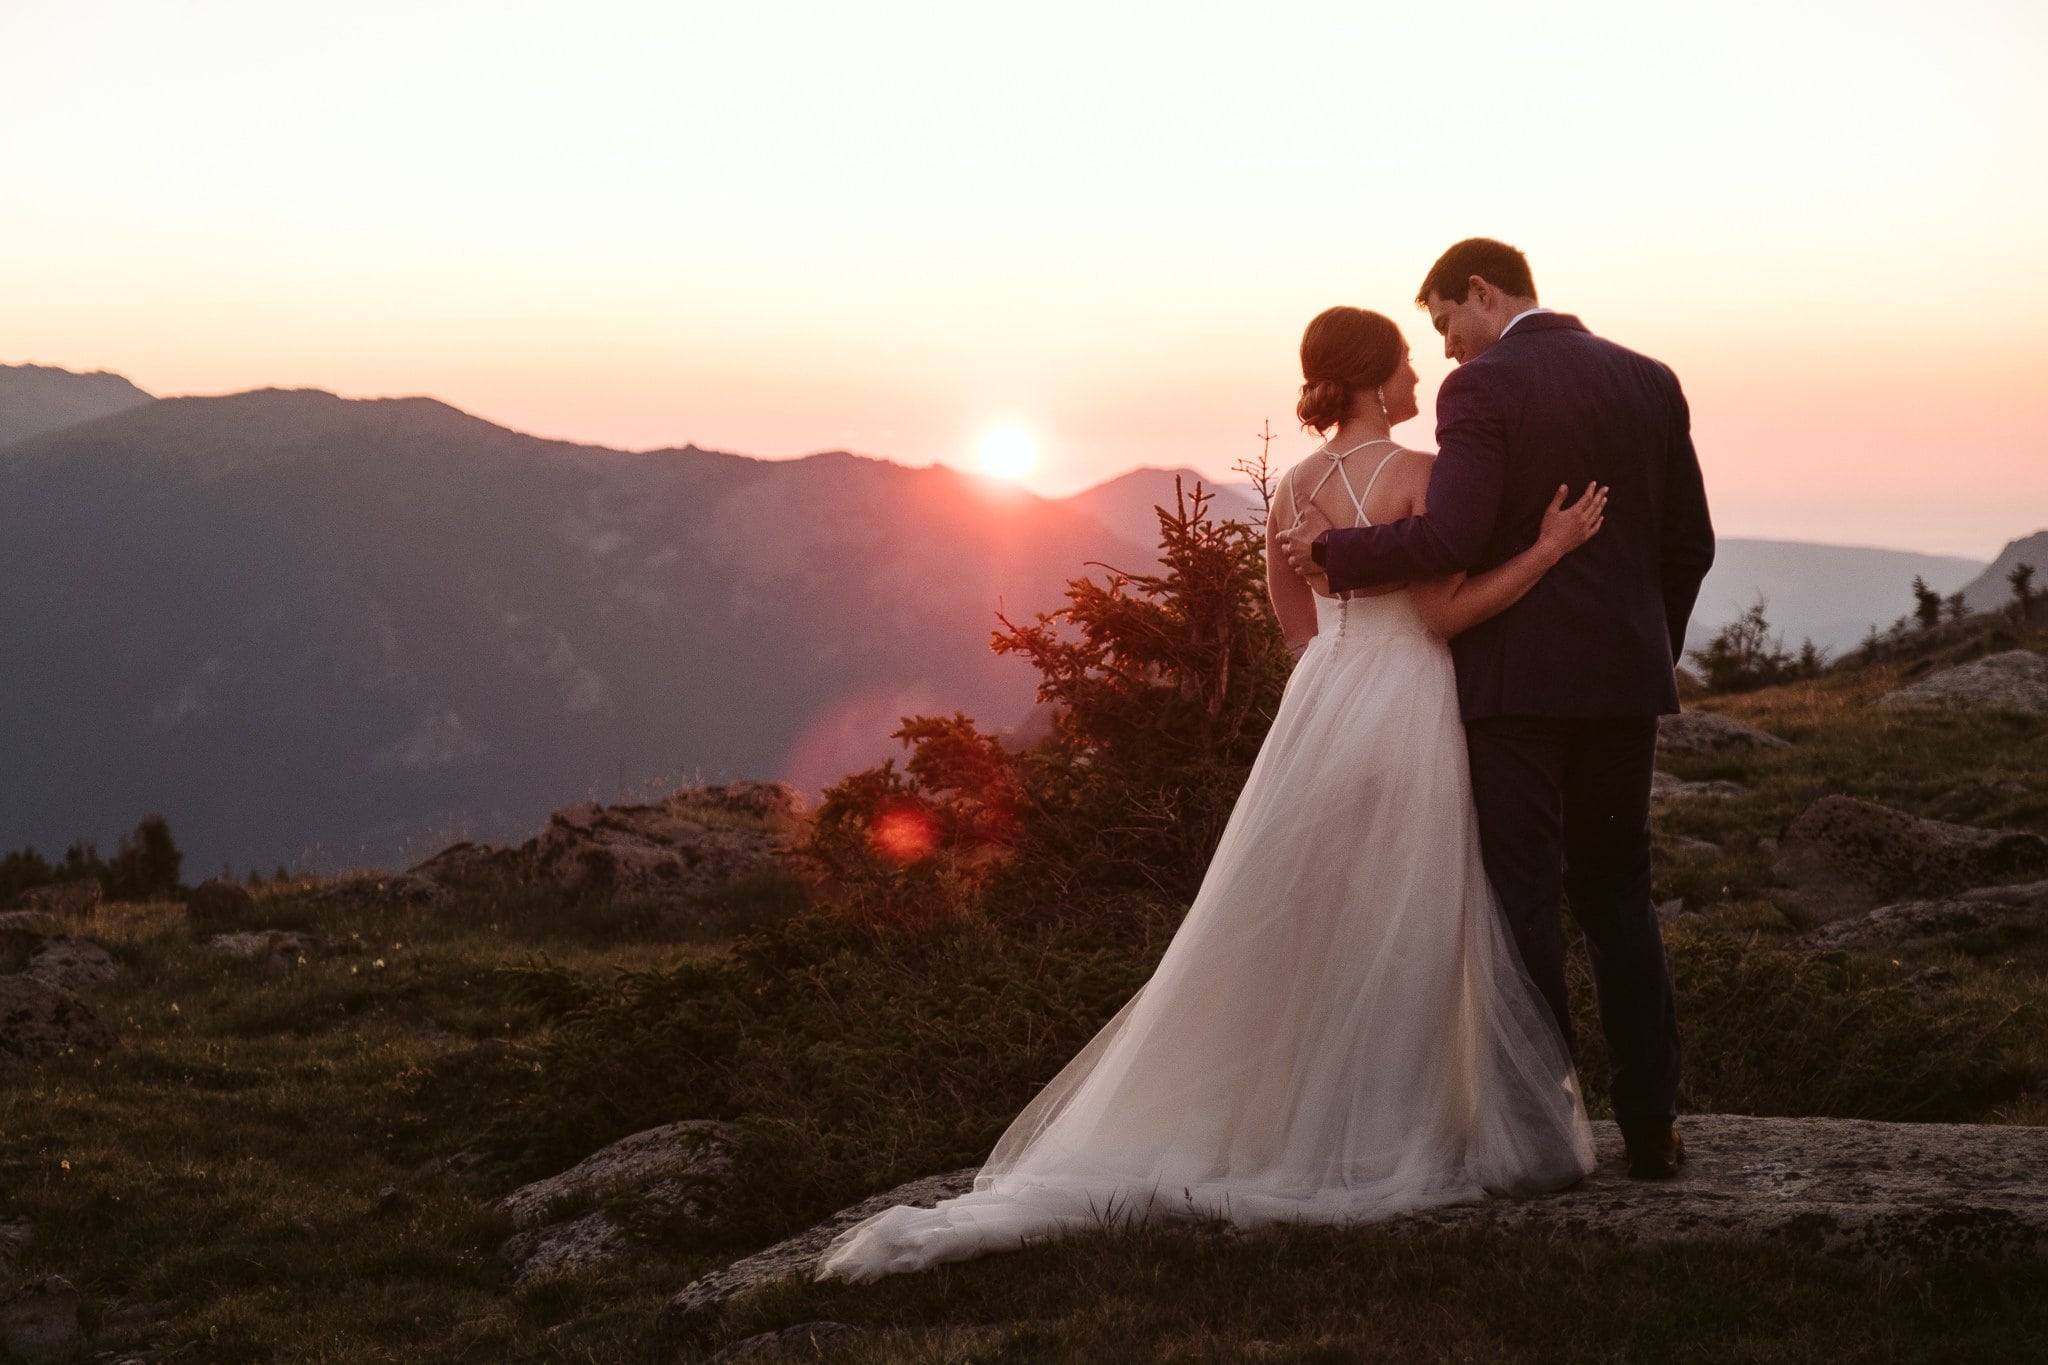 Sunrise hiking elopement in Rocky Mountain National Park, Colorado elopement photographer